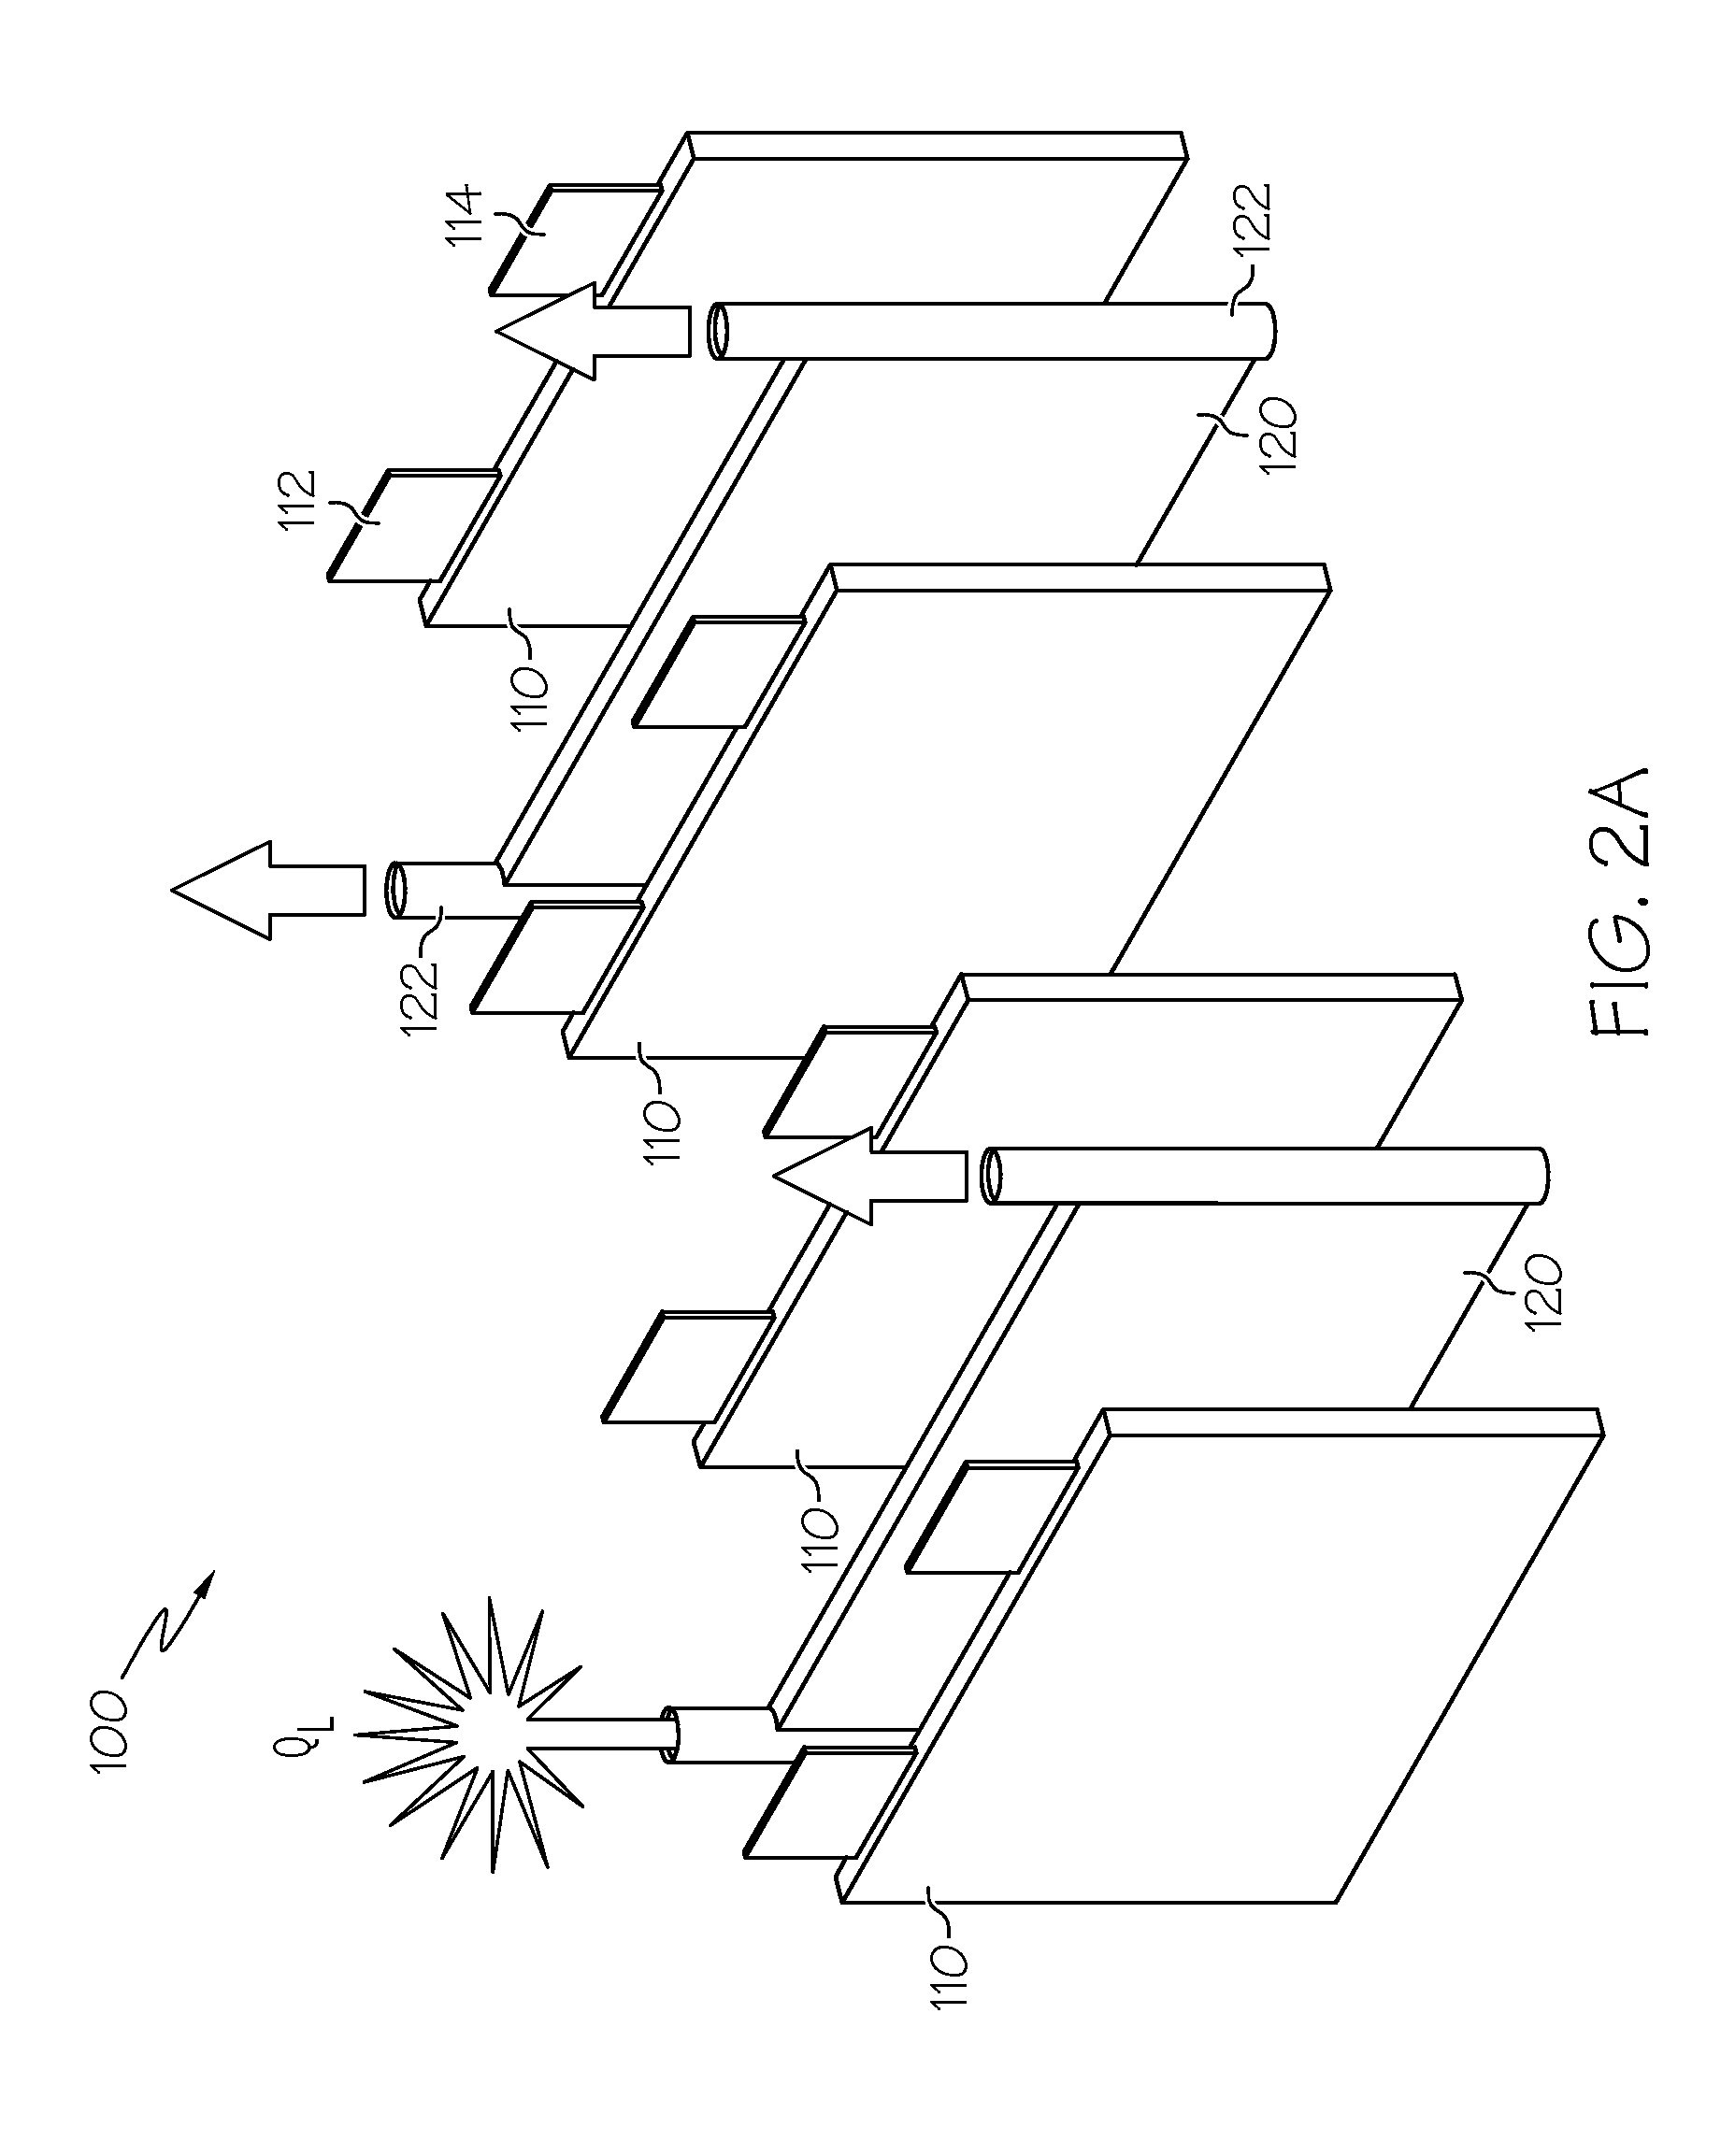 Method for mitigating thermal propagation of batteries using heat pipes